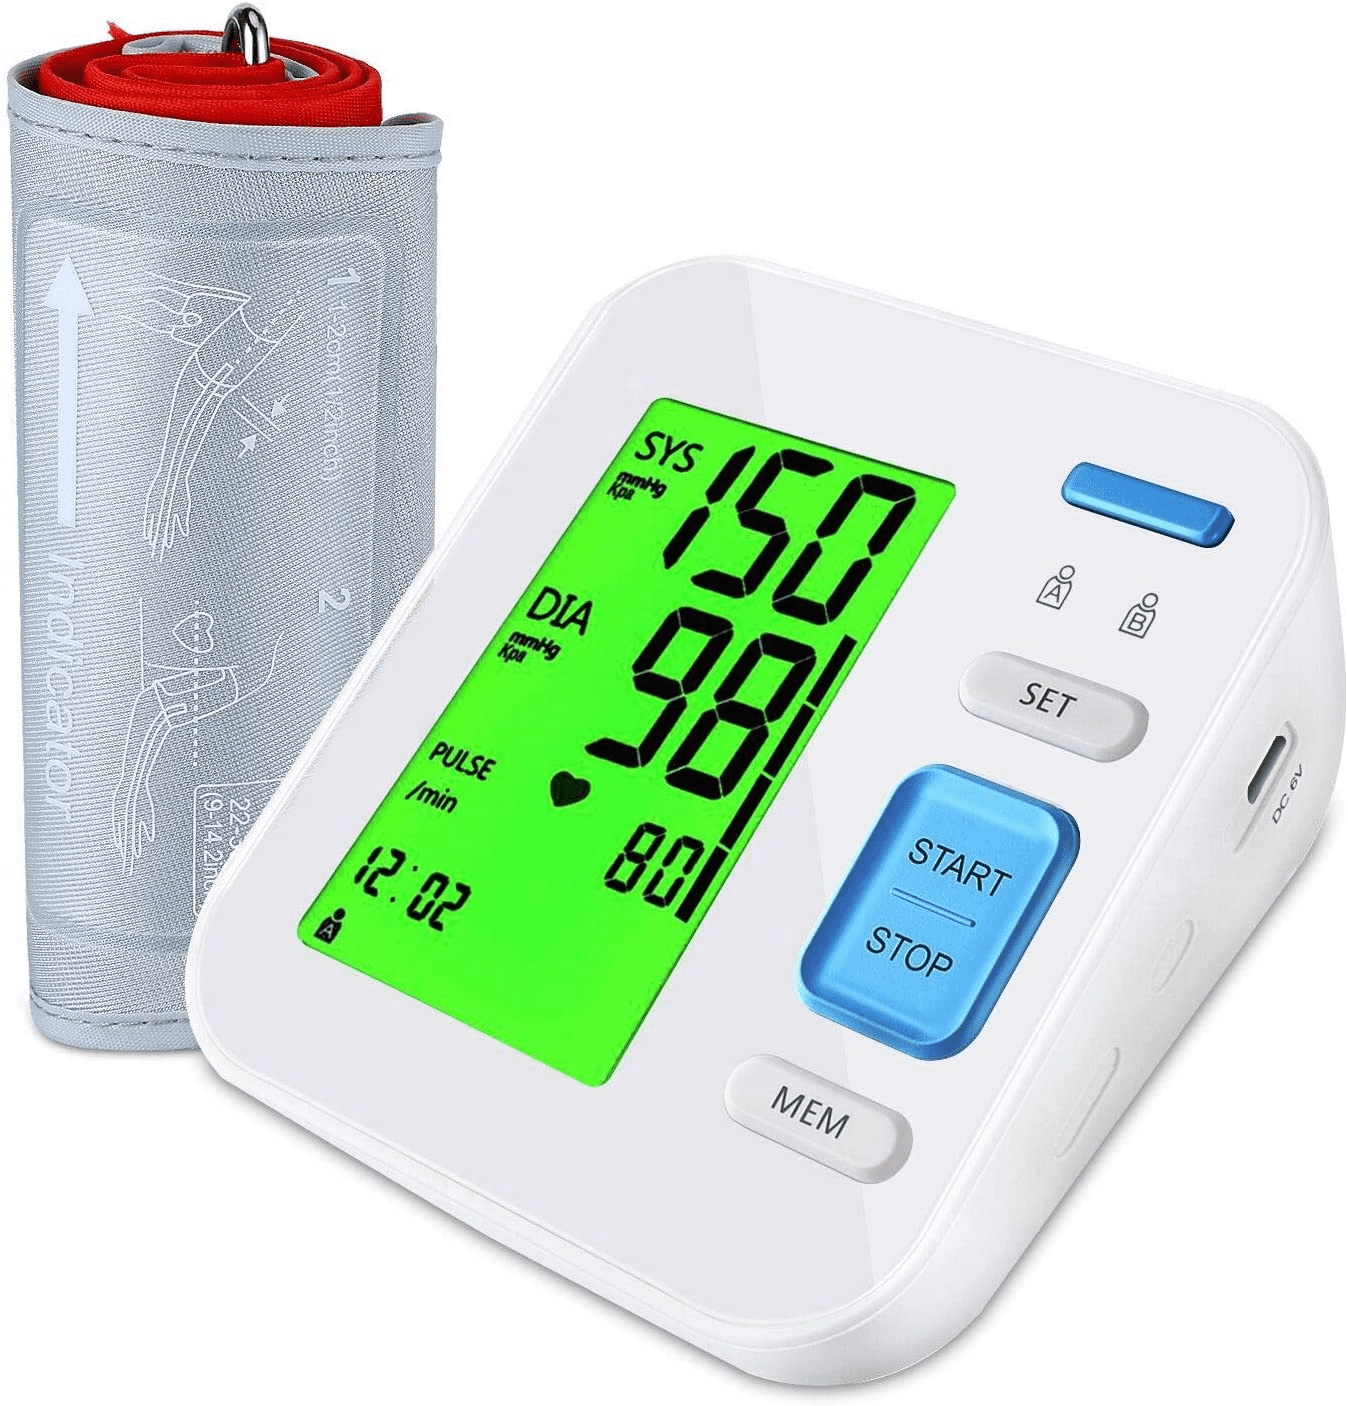 Upper Arm Blood Pressure Monitor, Automatic BP Machine 2 User Memory 3-Color Backlit Digital Display Pulse Rate Monitoring Meter Home Use Indicator w/ Adjustable Cuff, for Adult Pregnancy Parents